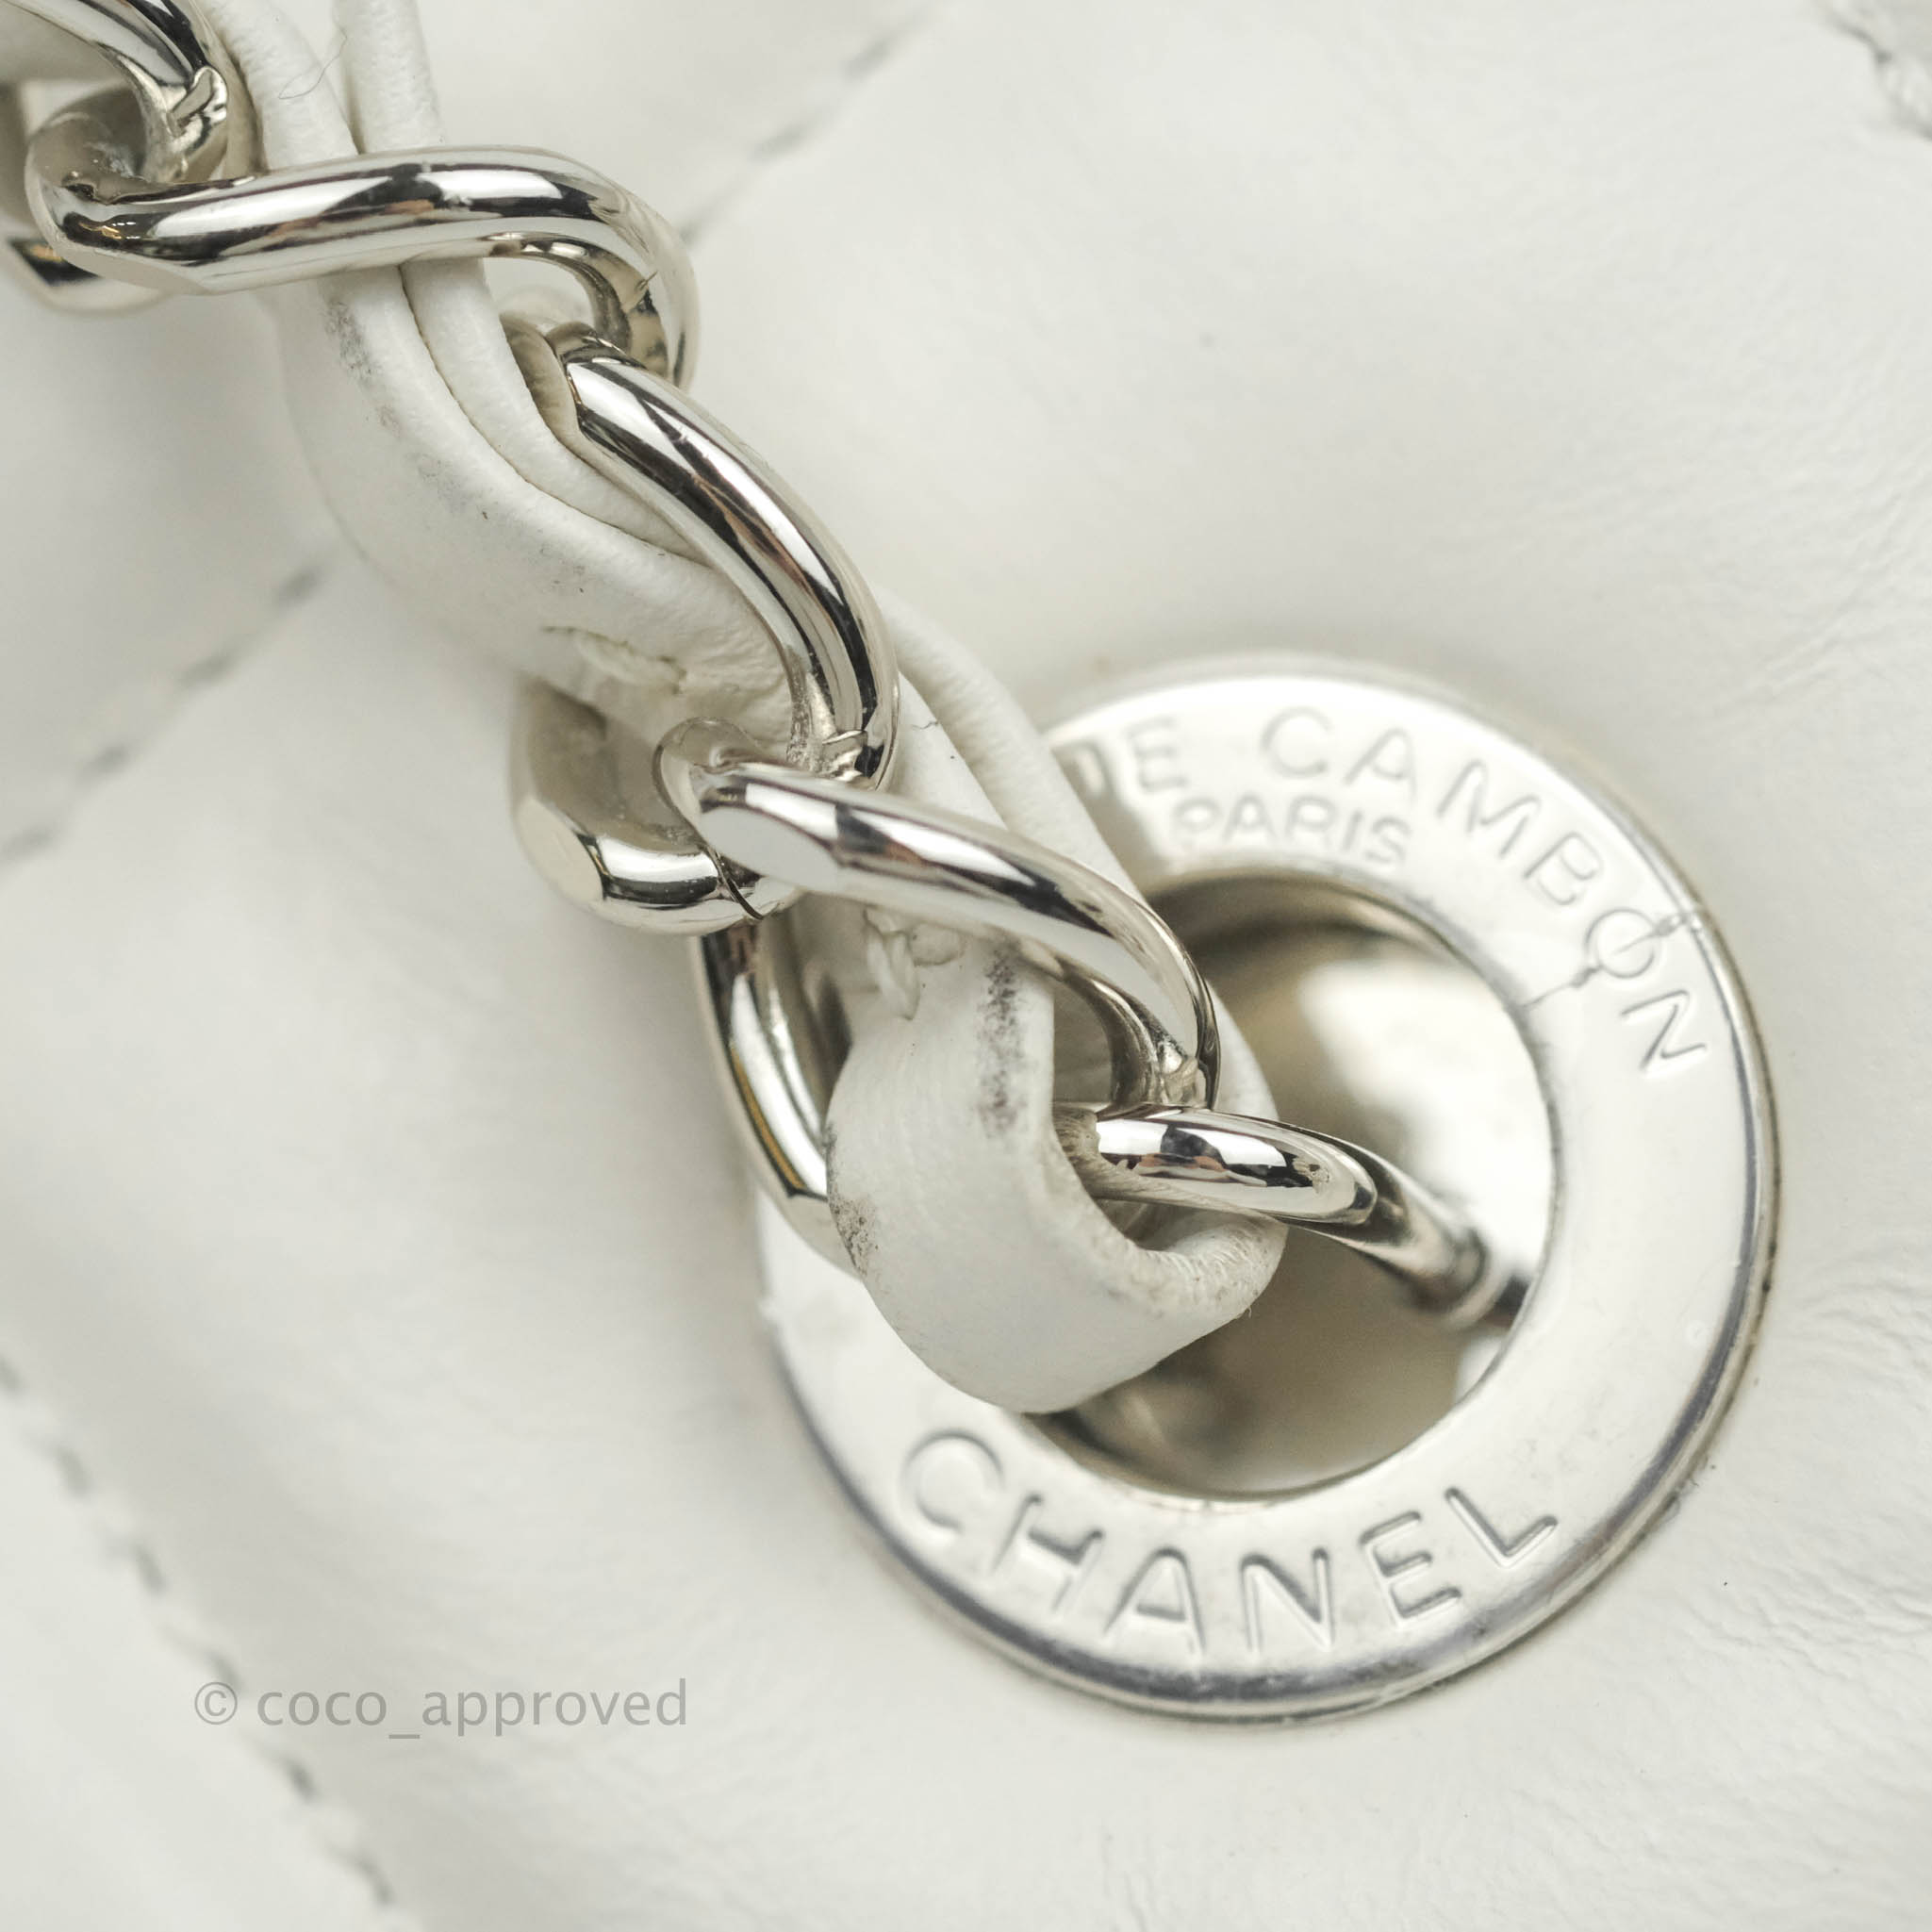 Chanel Calfskin Small Bowling Bag White Silver Hardware – Coco Approved  Studio